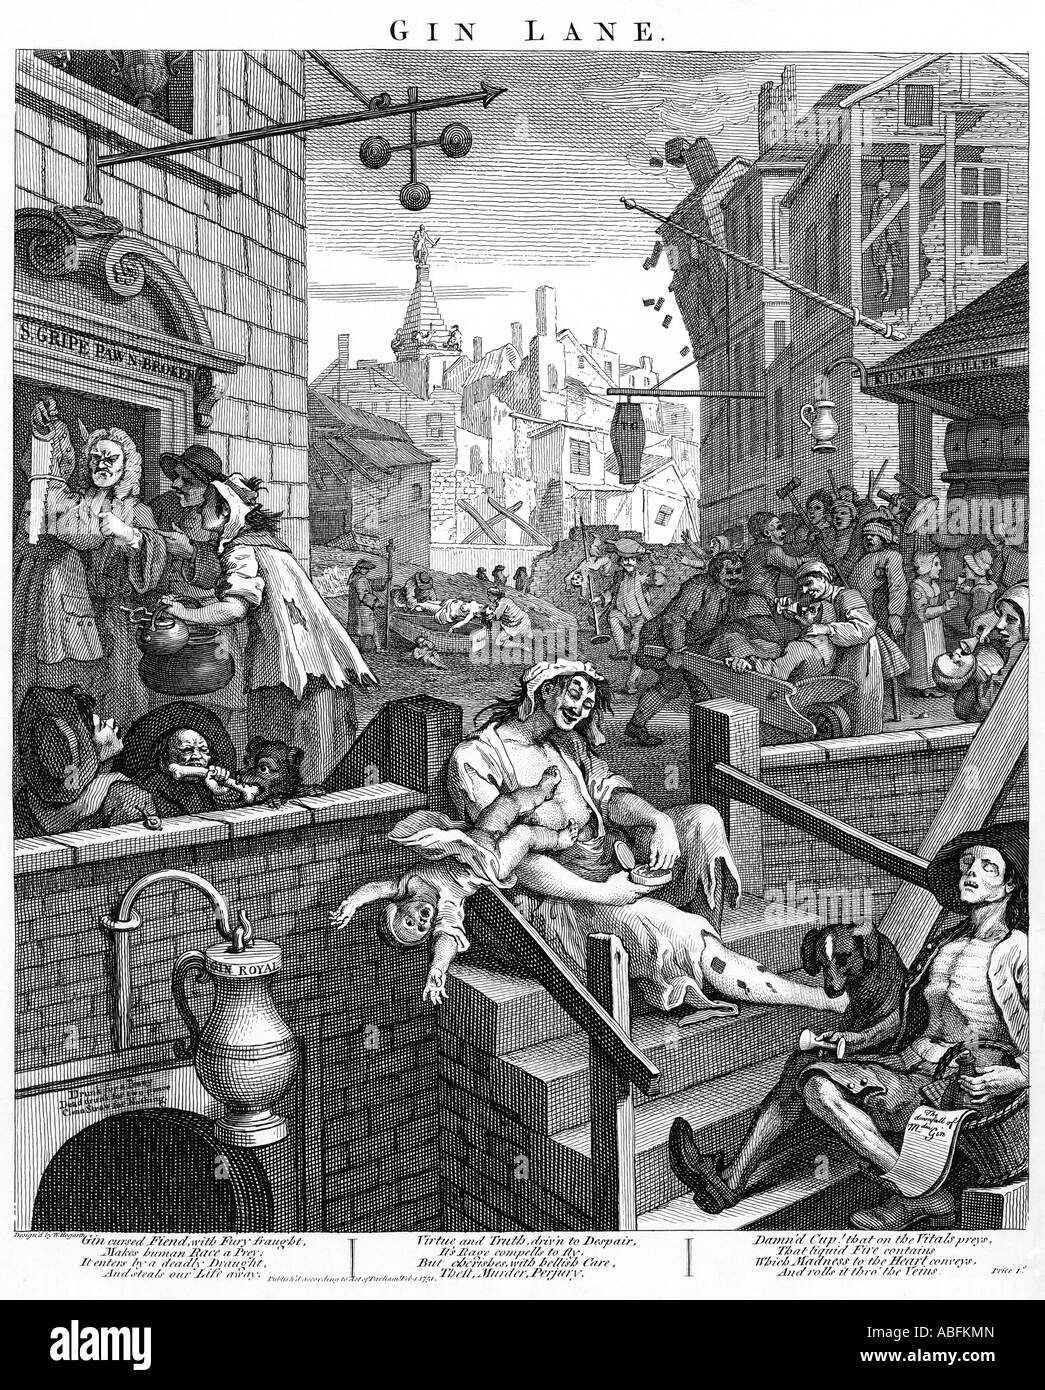 Gin Lane William Hogarth 3rd state of the 1751 engraving showing the iniquitous effects of 18th century London craze for gin Stock Photo